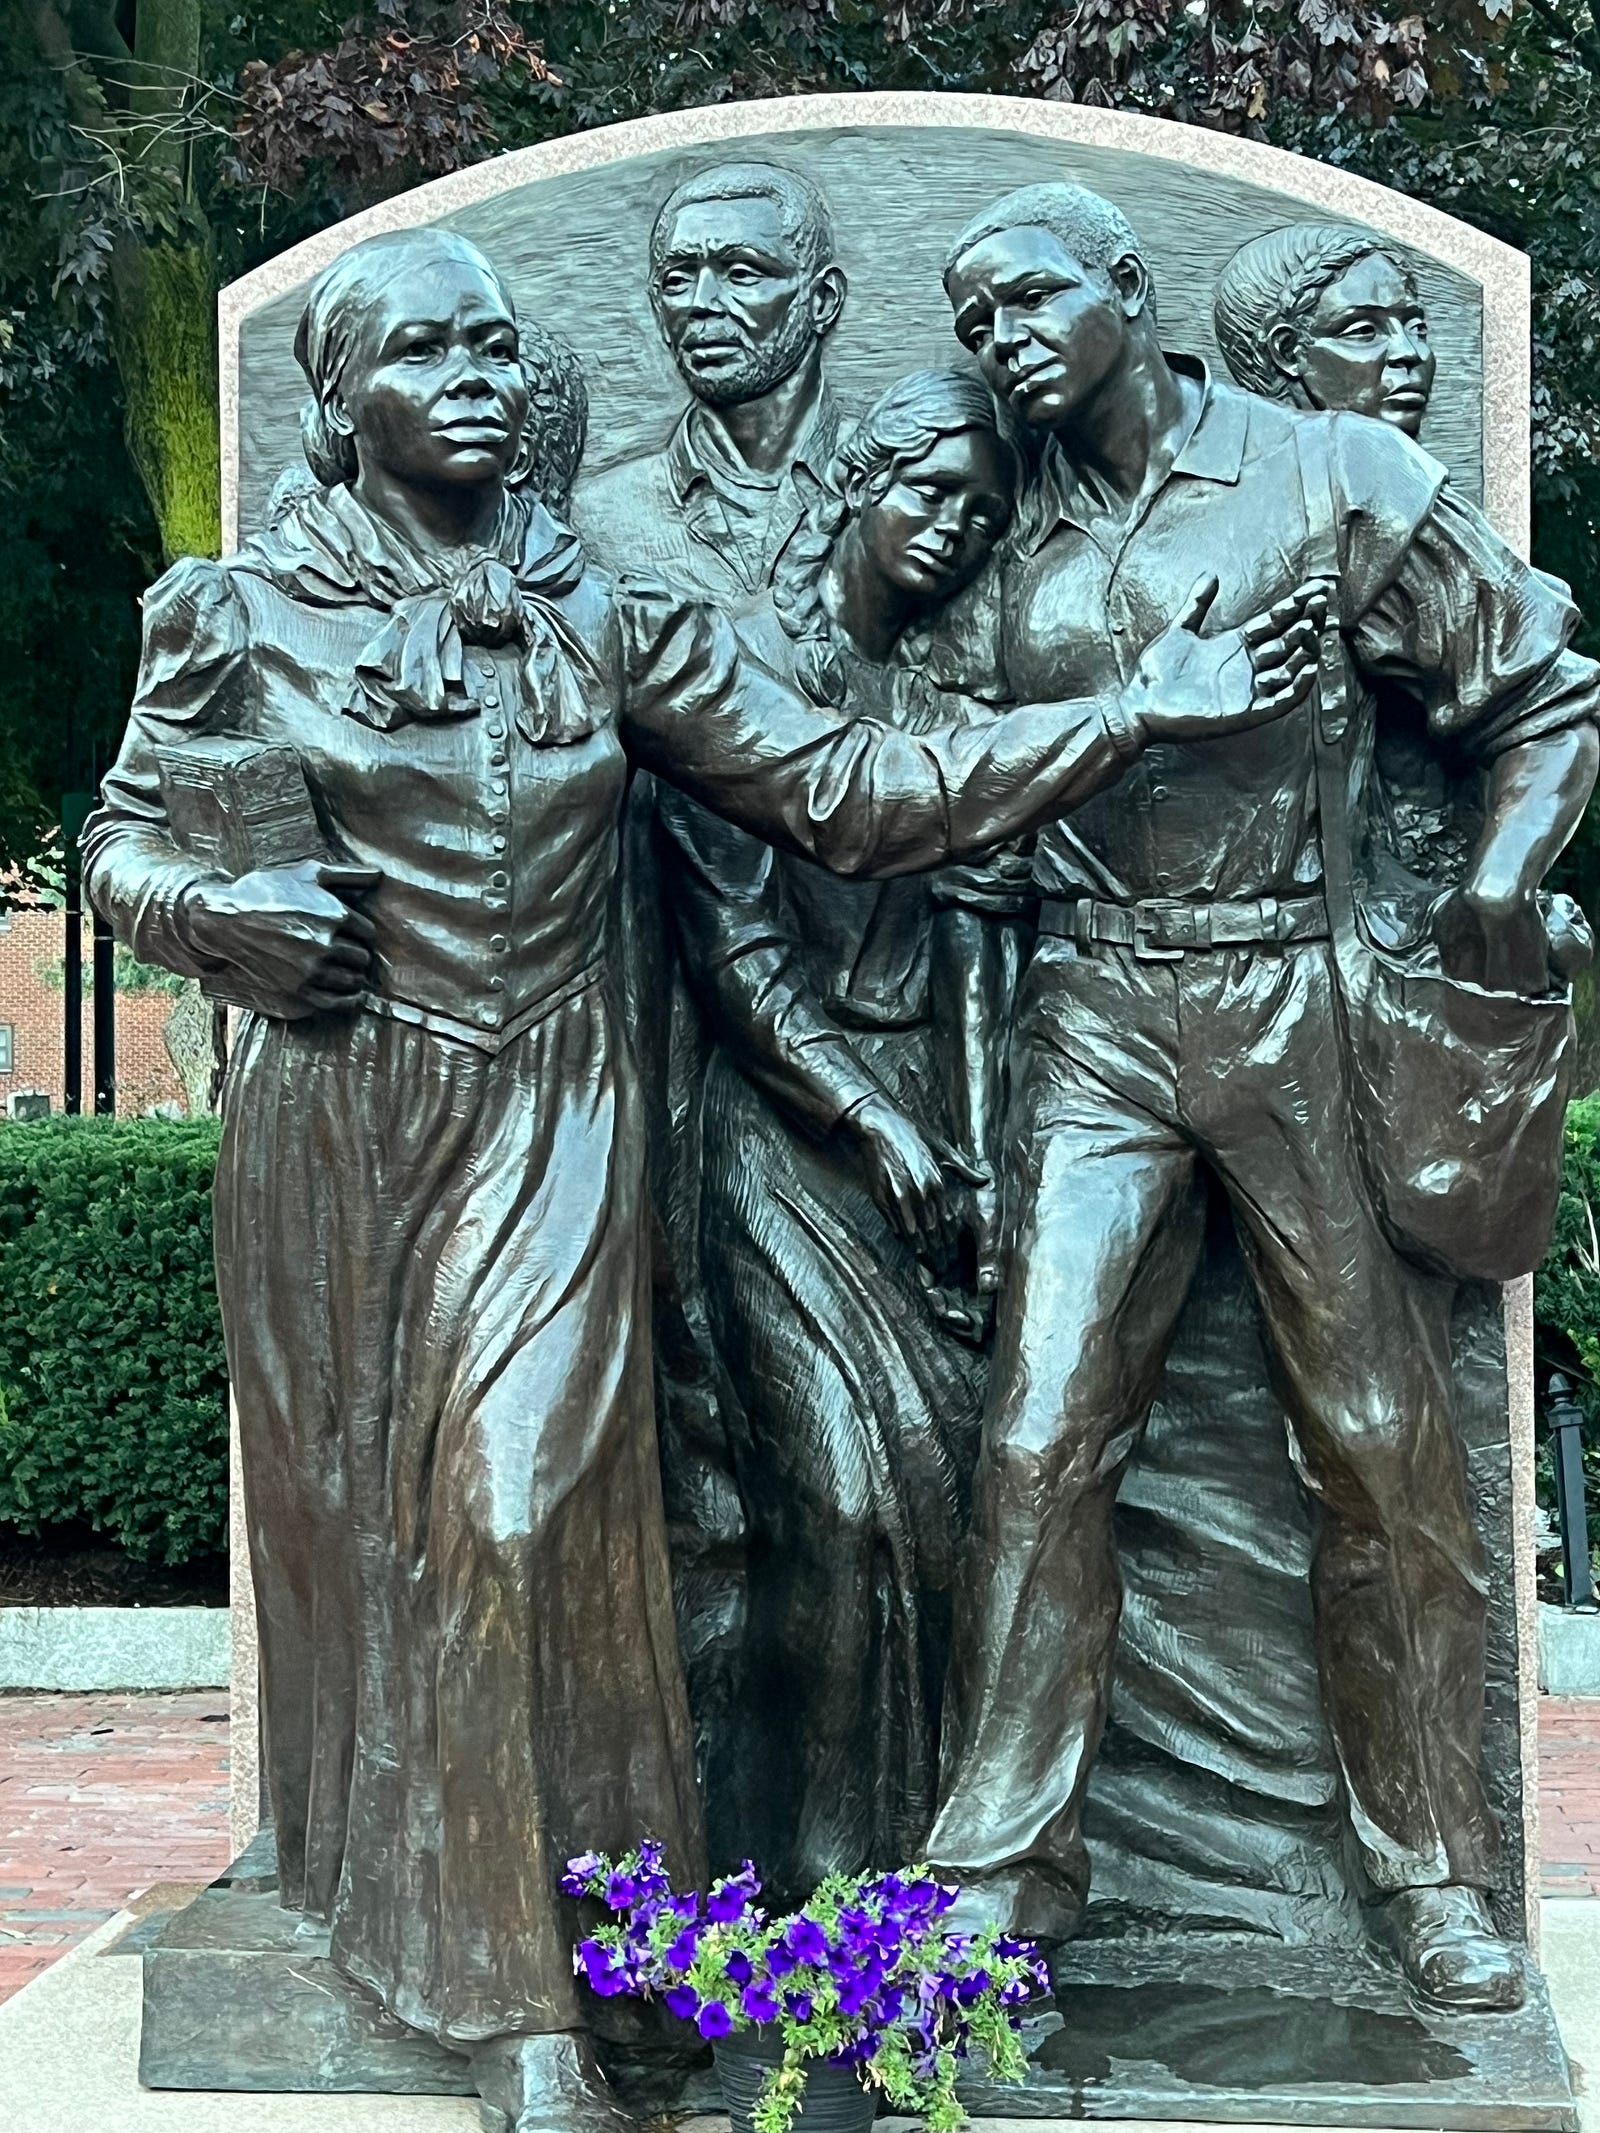 Photo of the Harriet Tubman Memorial in Boston, Mass showing Tubman leading a family of enslaved people to freedom.